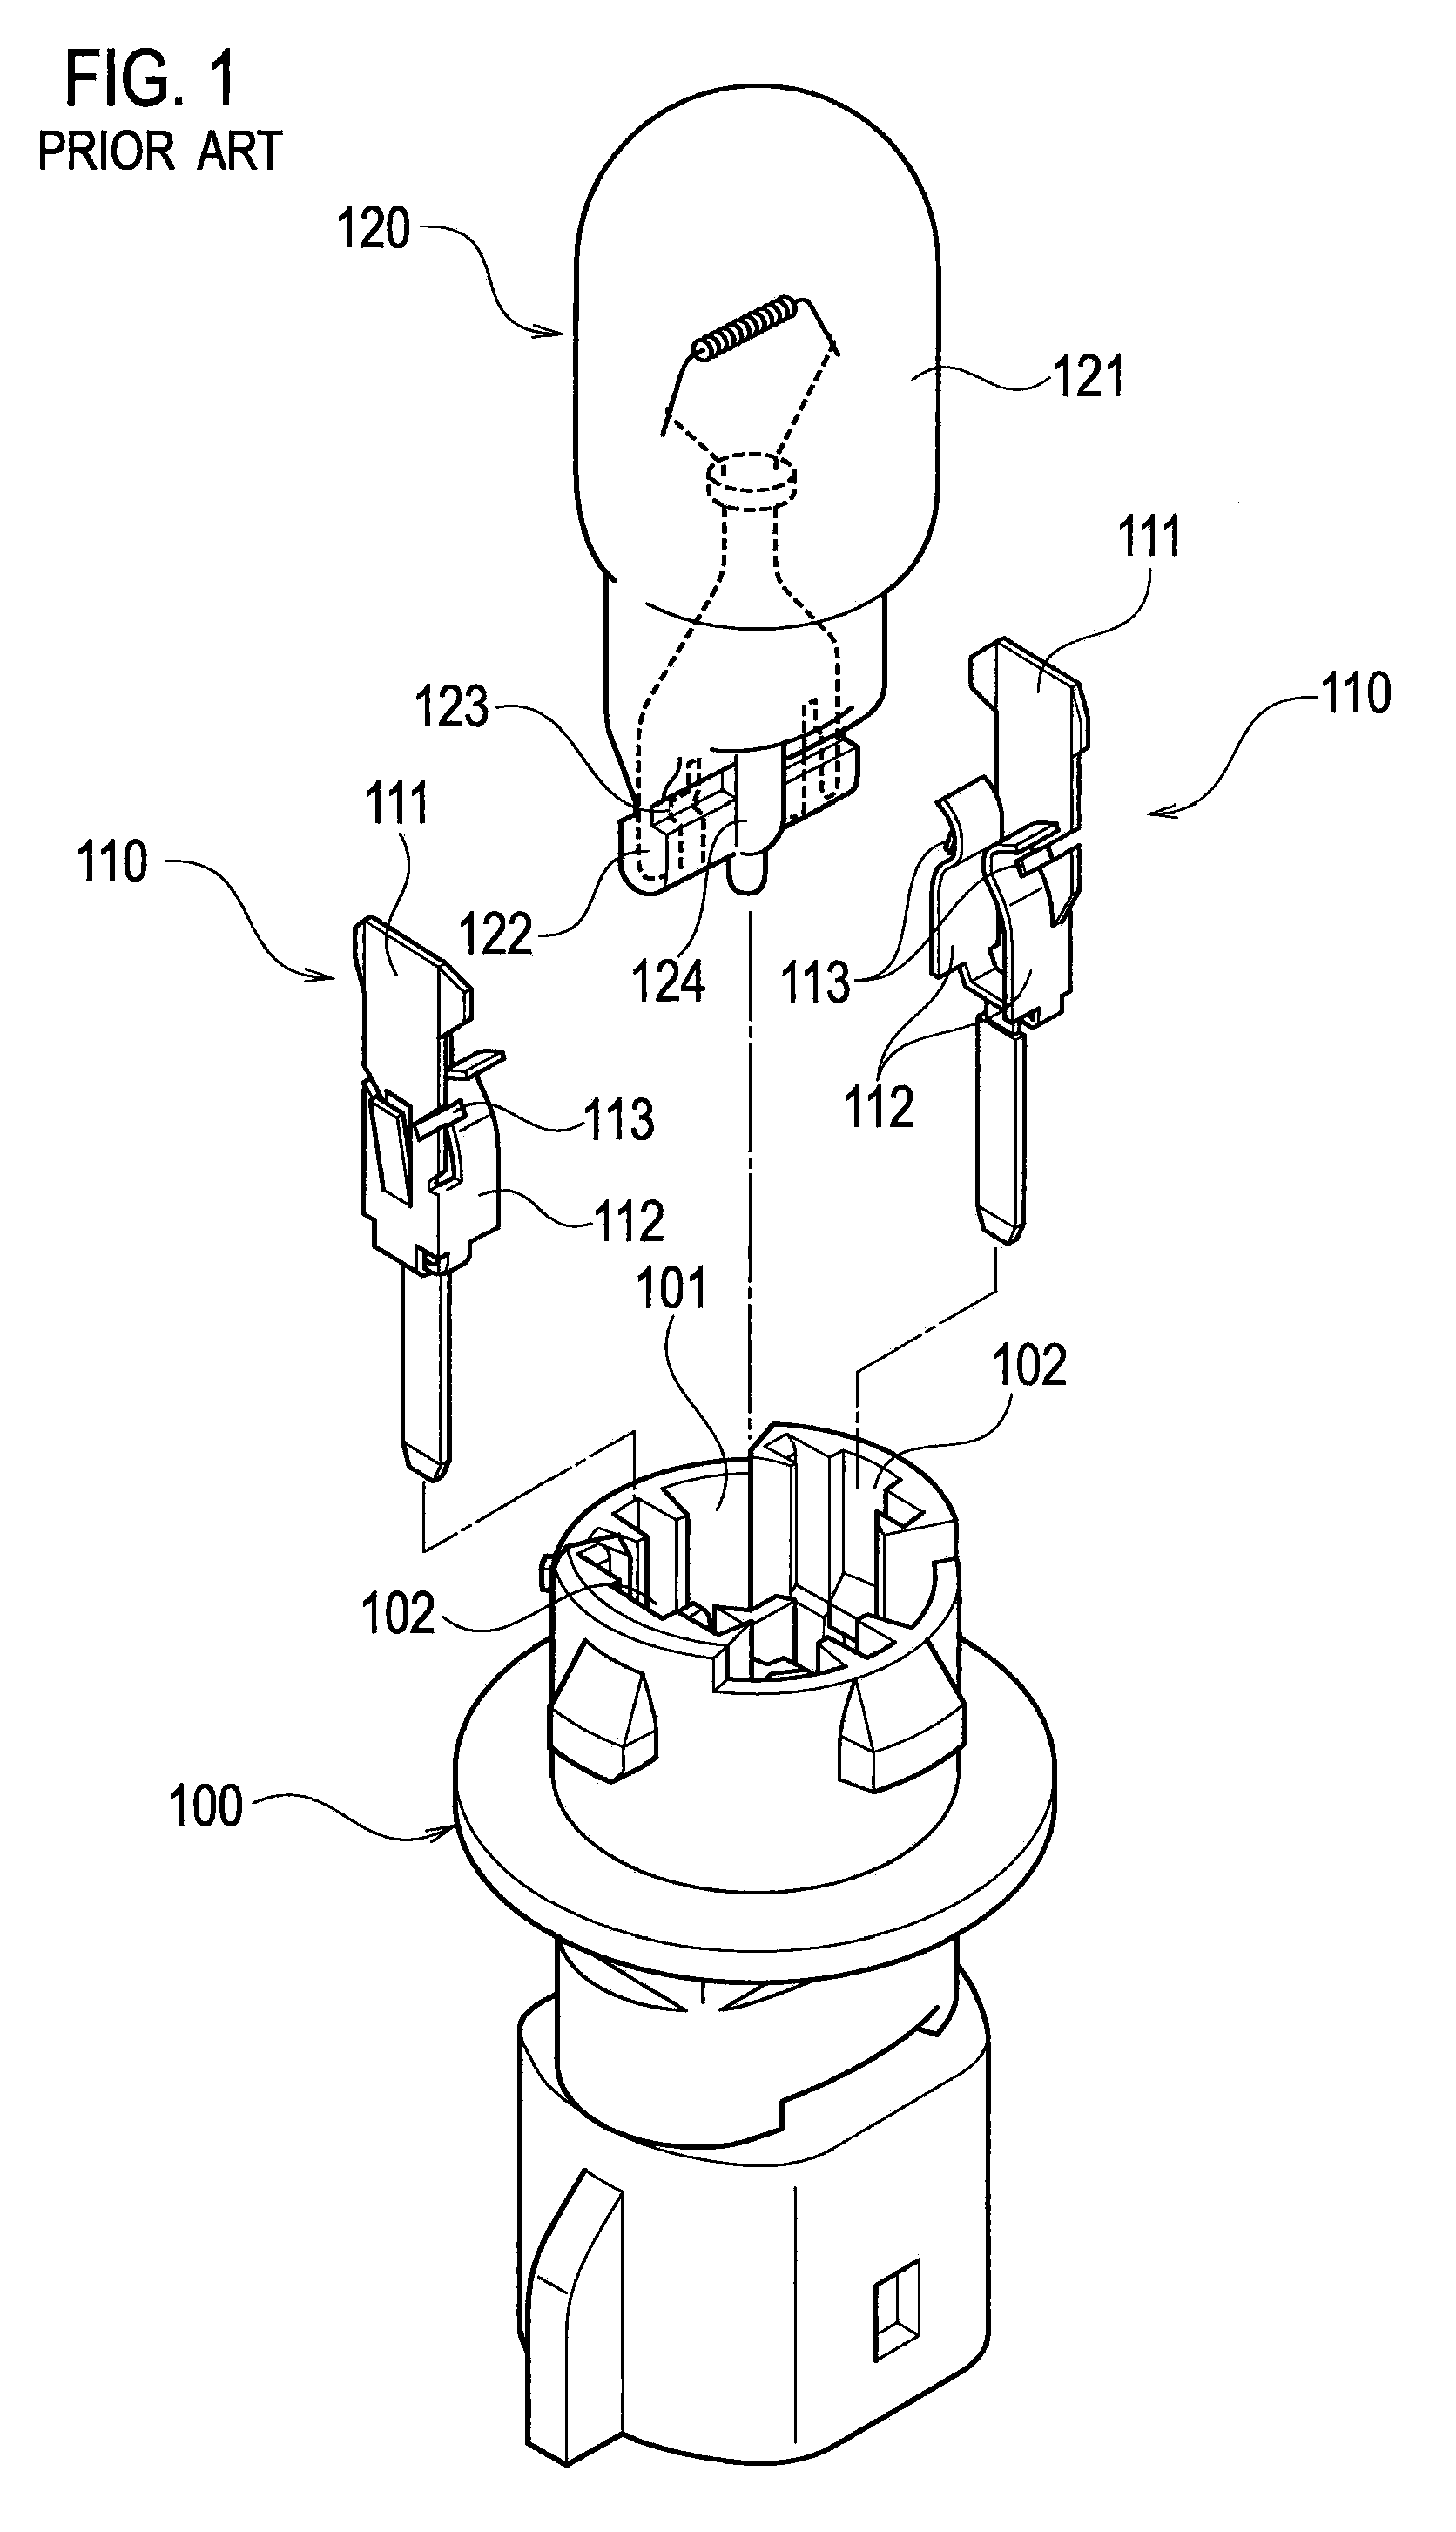 Bulb Socket Structure for Onboard Interior Lighting System